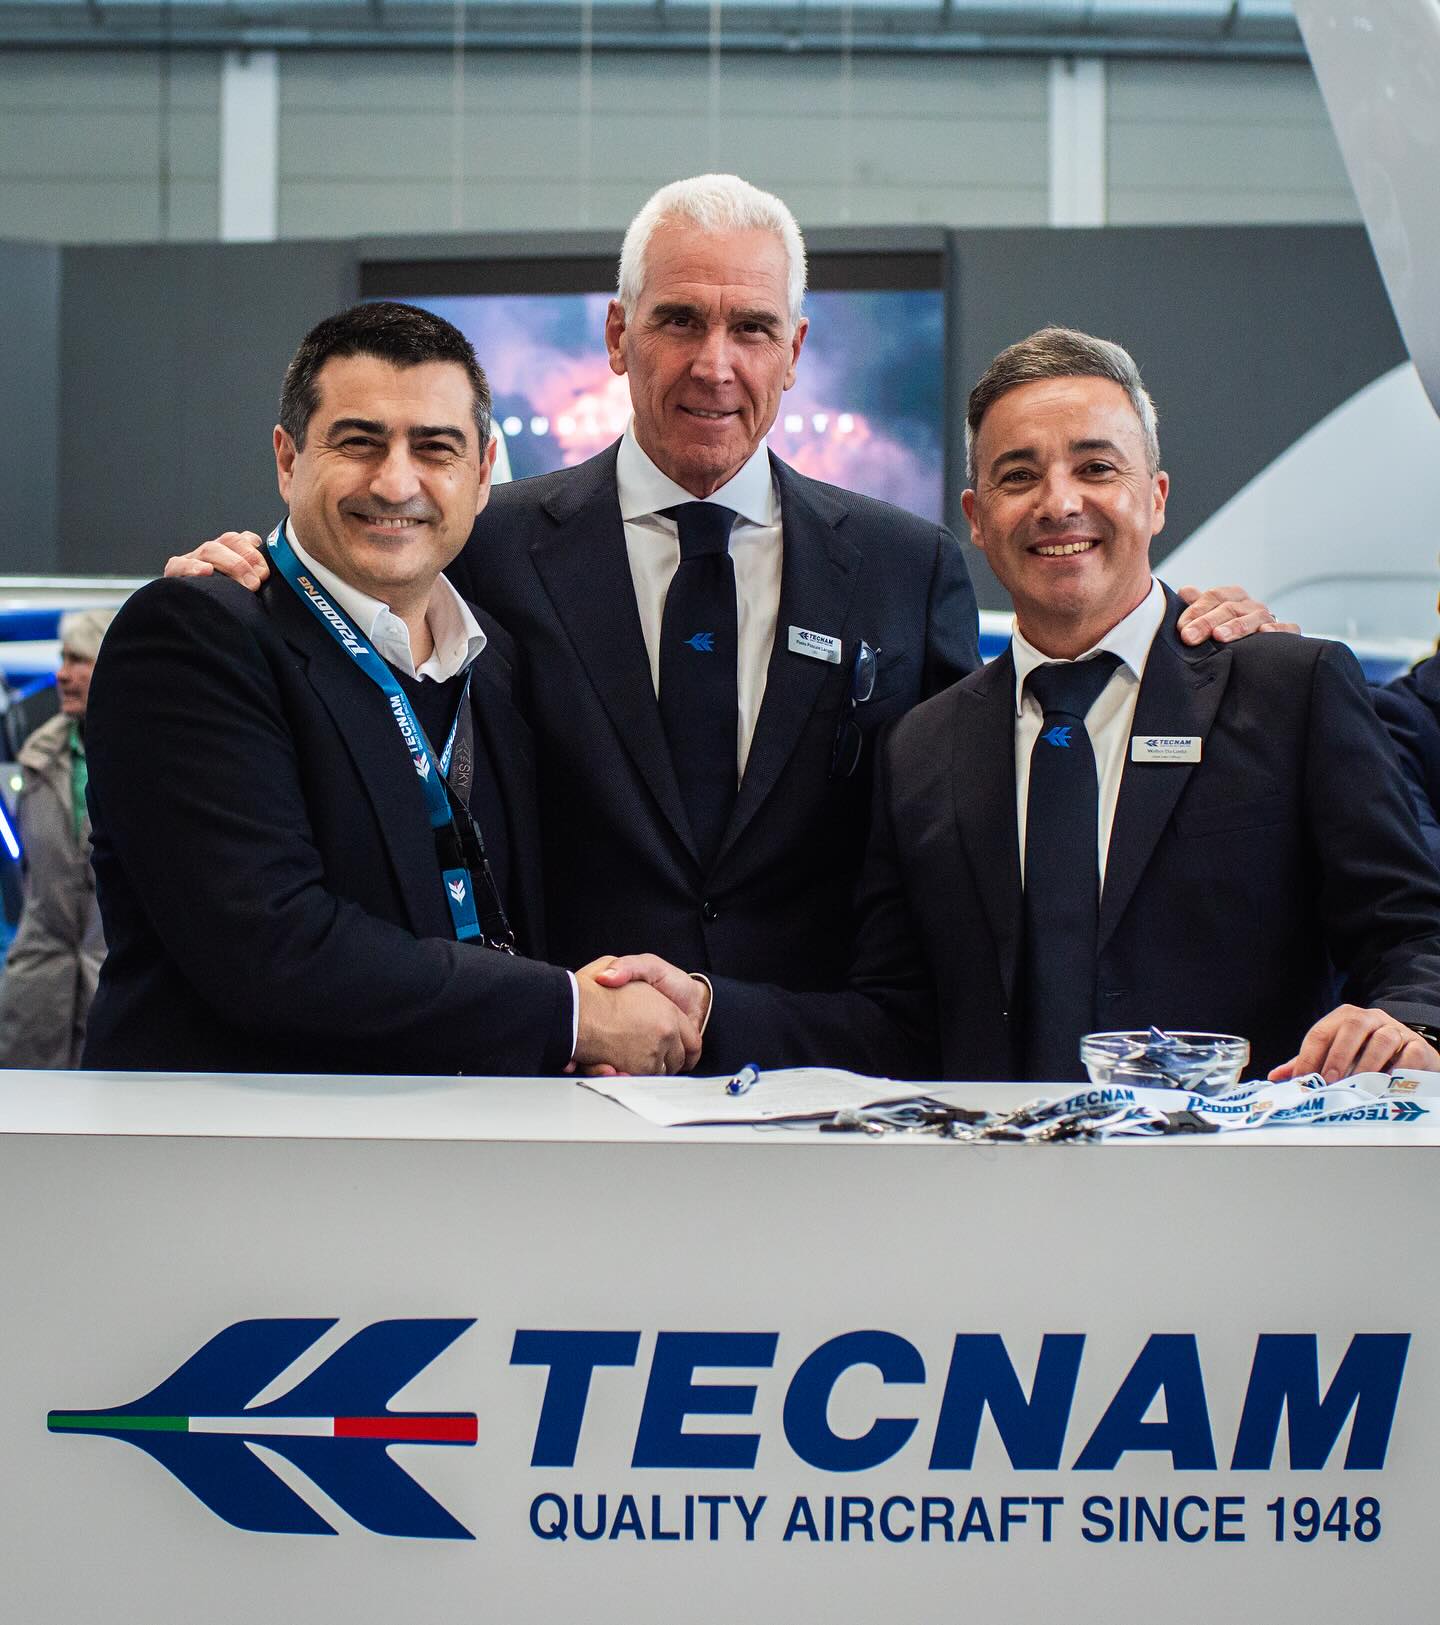 We are delighted to announce a recent partnership with Tecnam